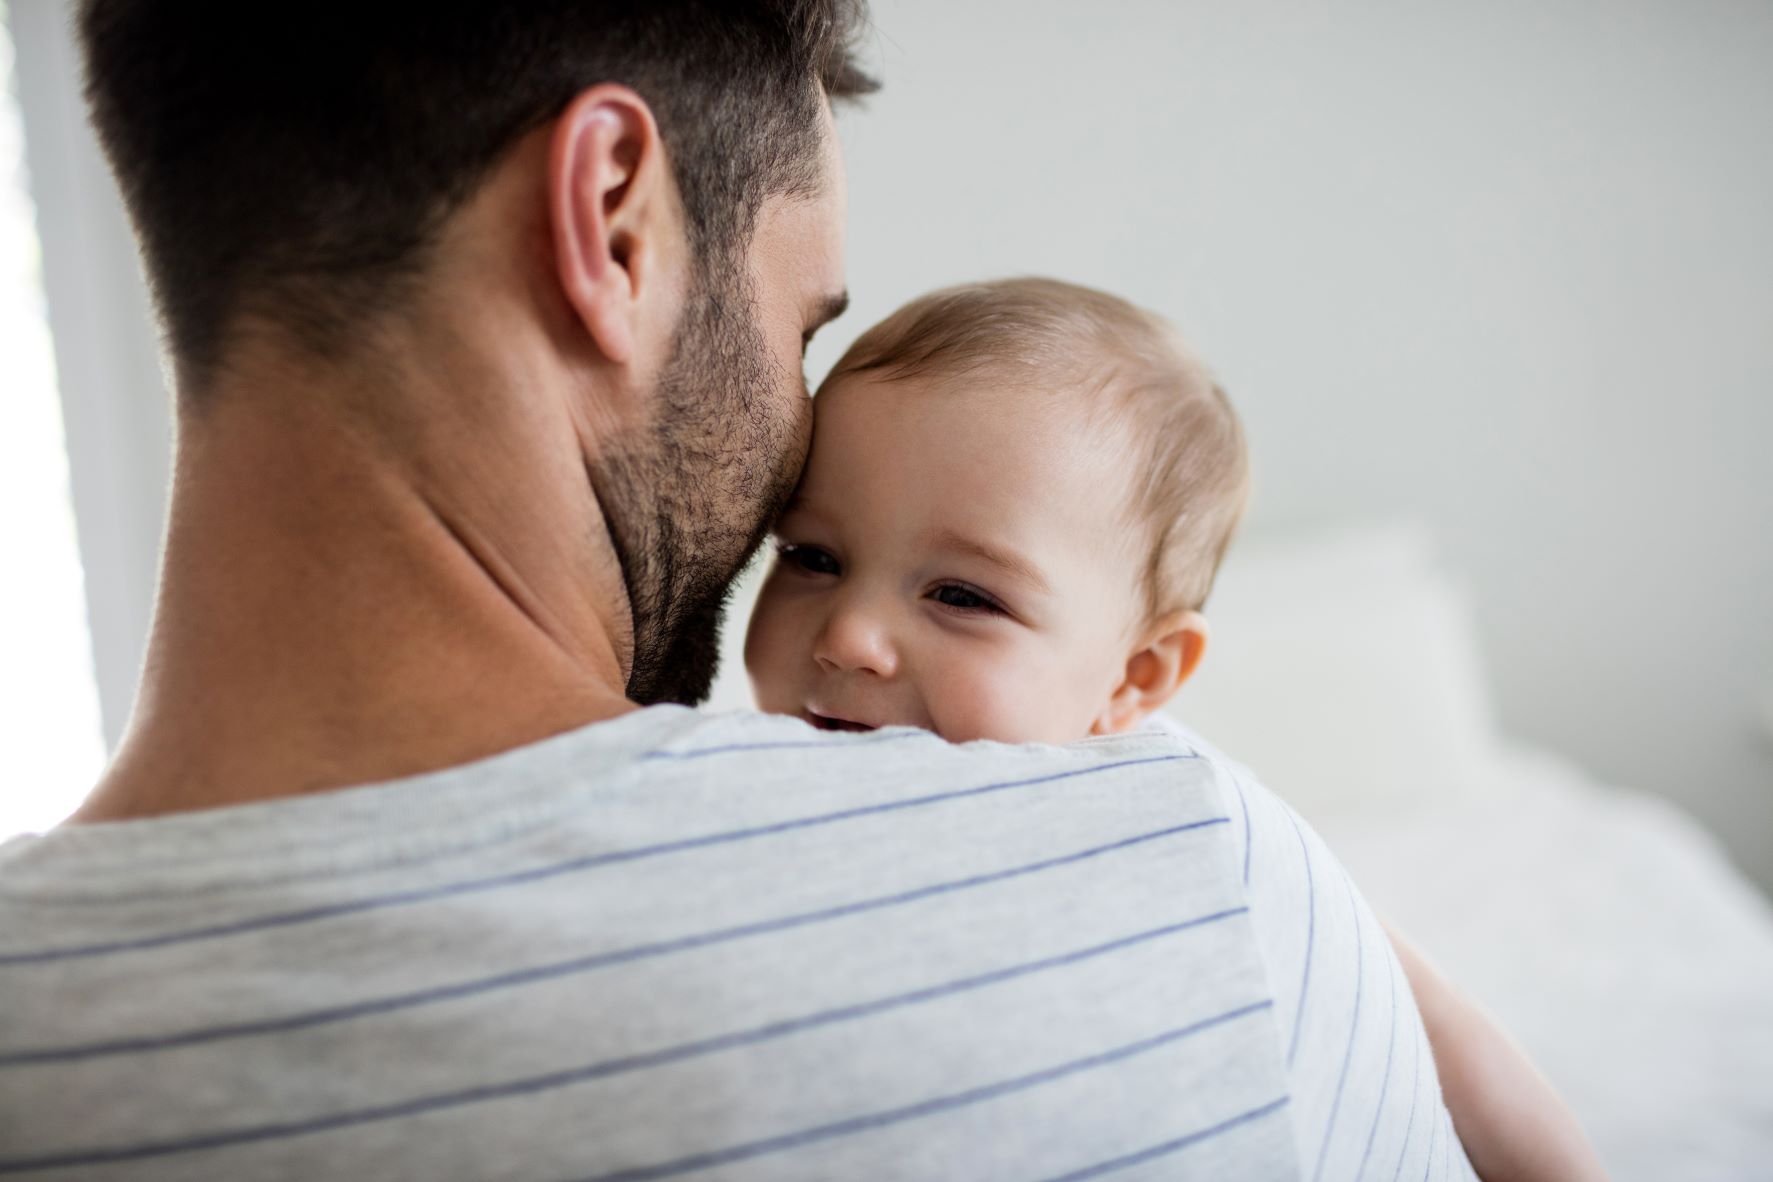 How to better engage fathers in their children’s care